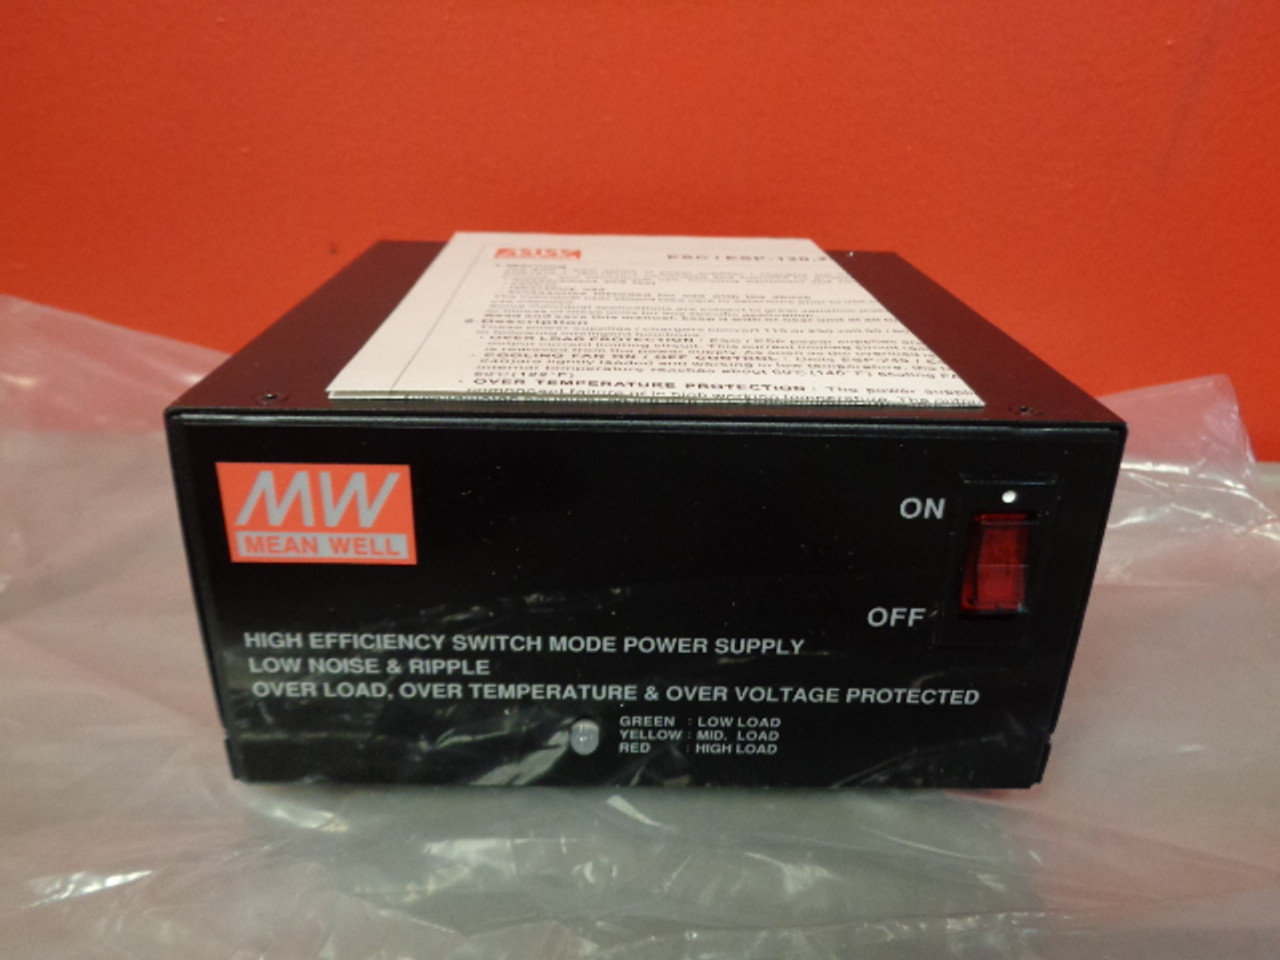 Mean Well ESP-240-54 High Efficiency Switch Mode Power Supply